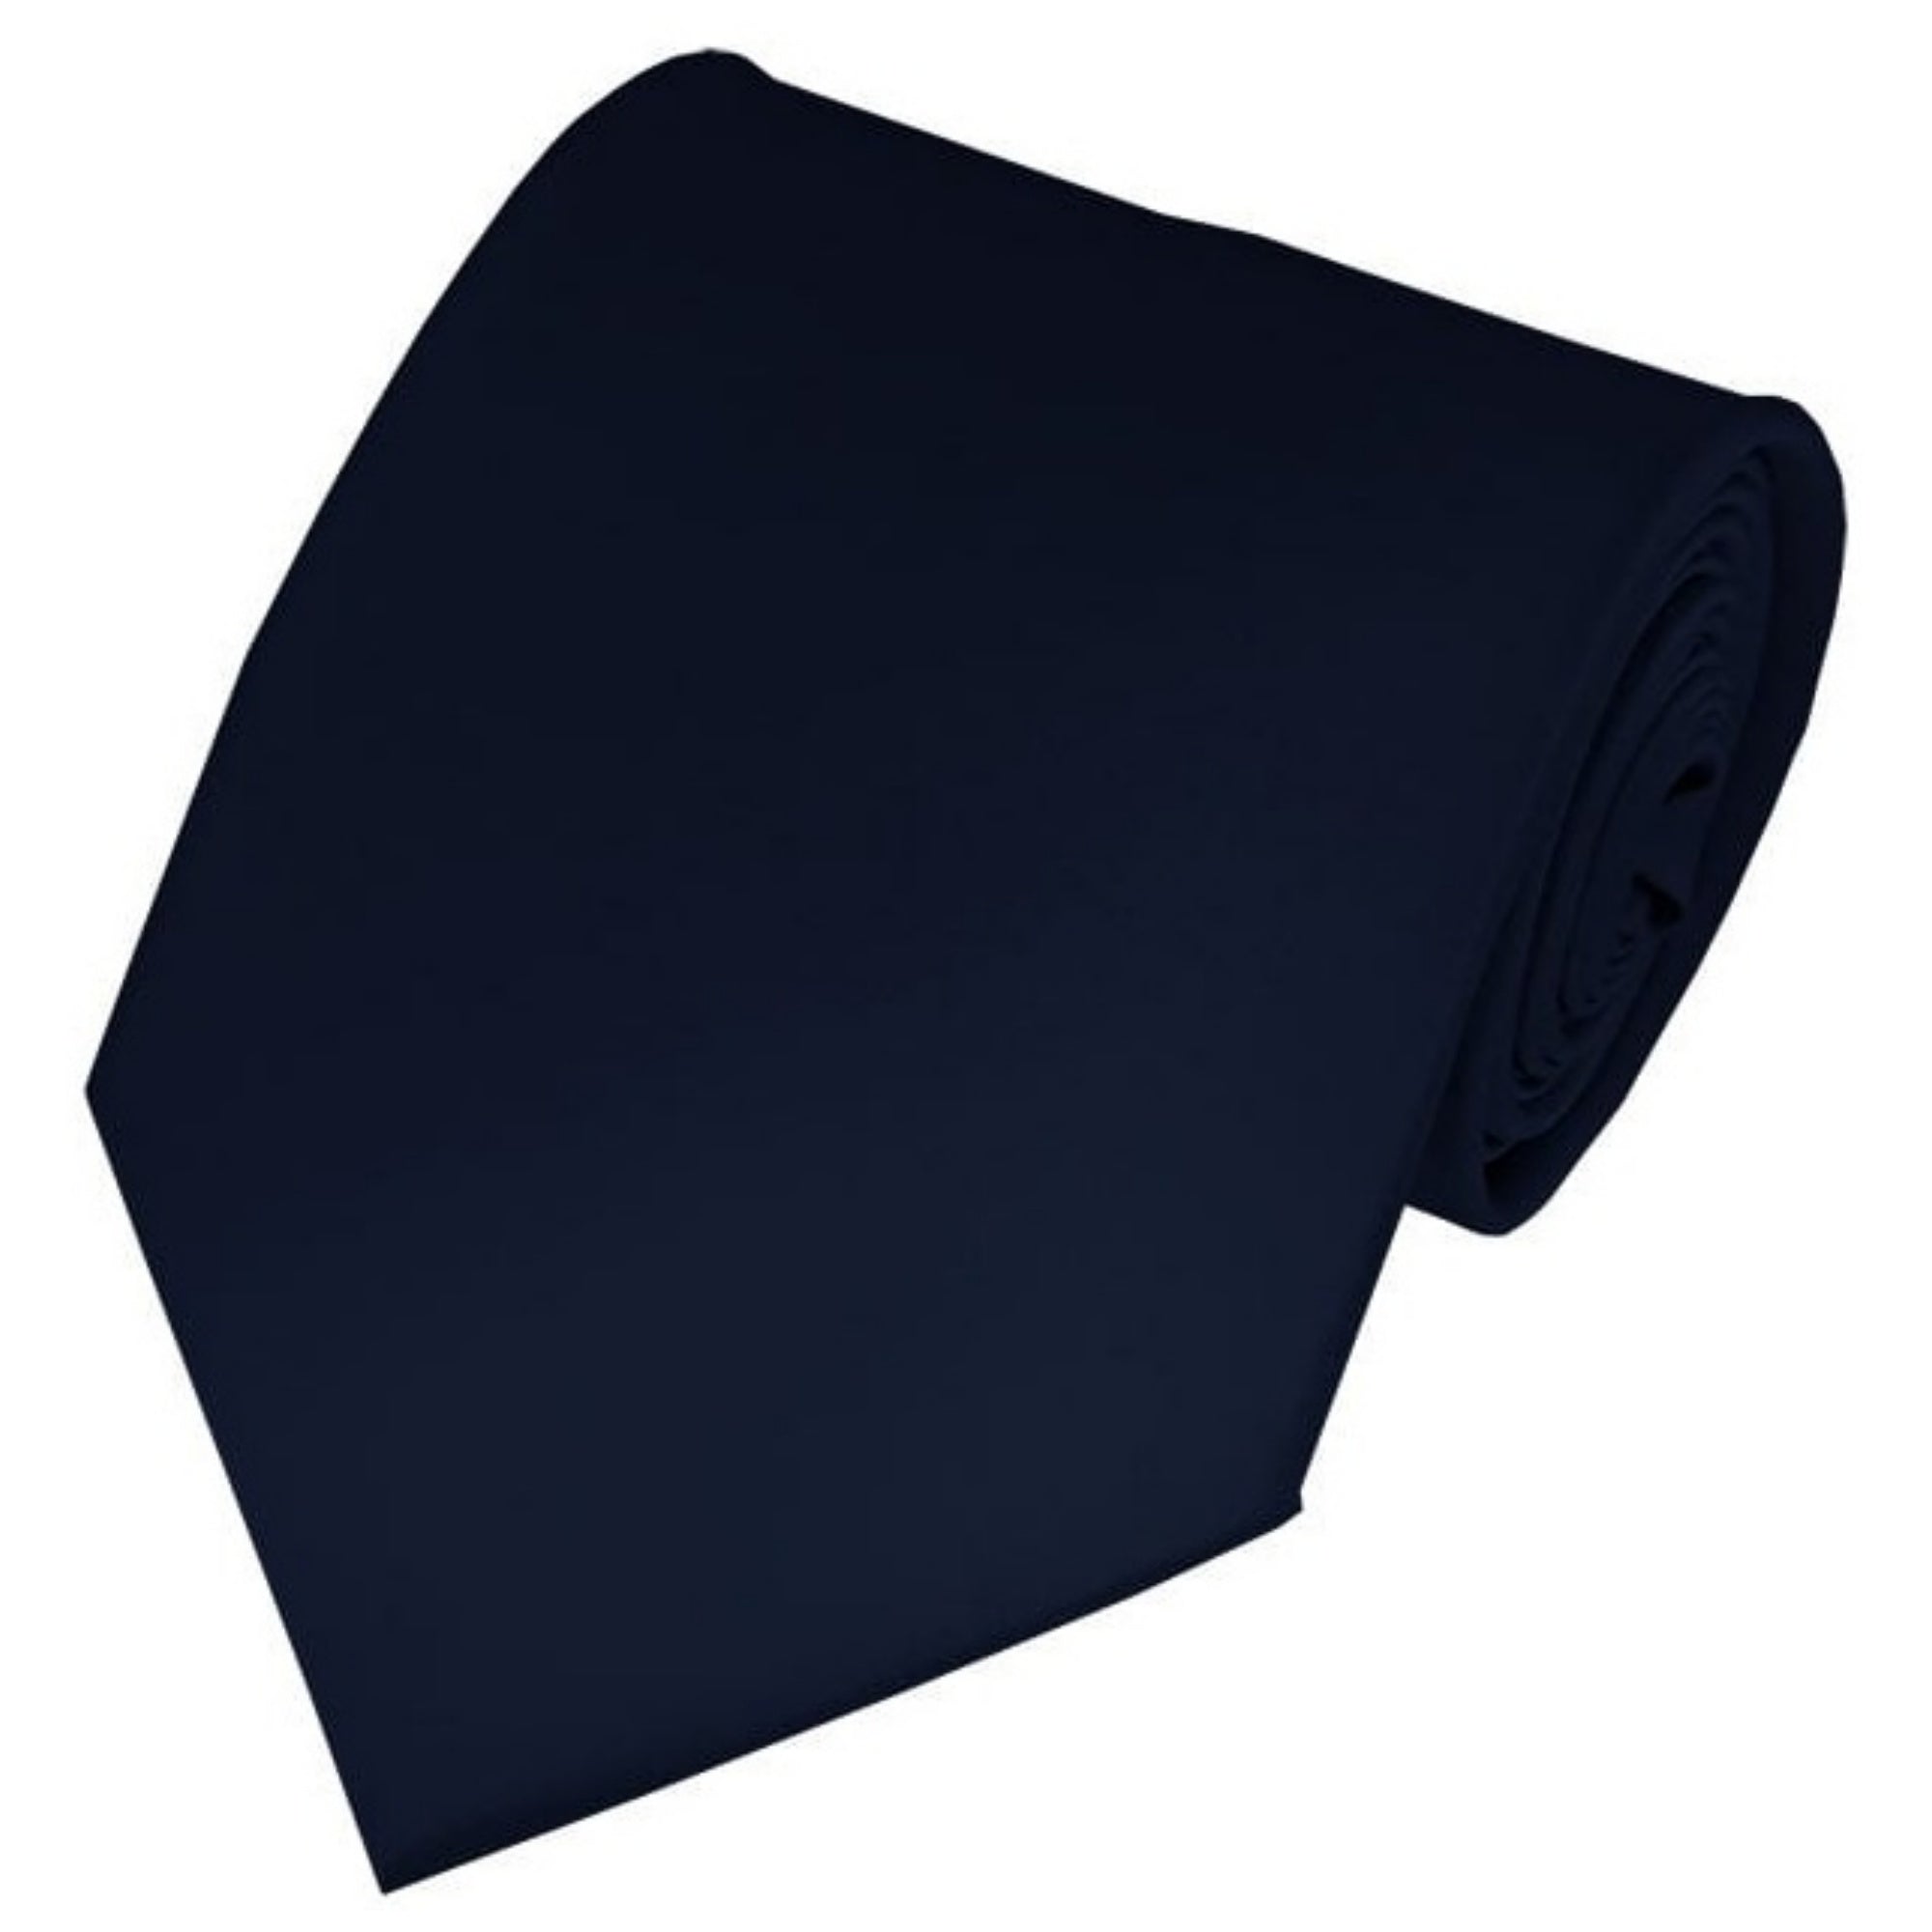 TheDapperTie Solid Color 3.5 Inch Wide And 62 Inch Extra Long Necktie For Big & Tall Men Neck Tie TheDapperTie Navy Blue  